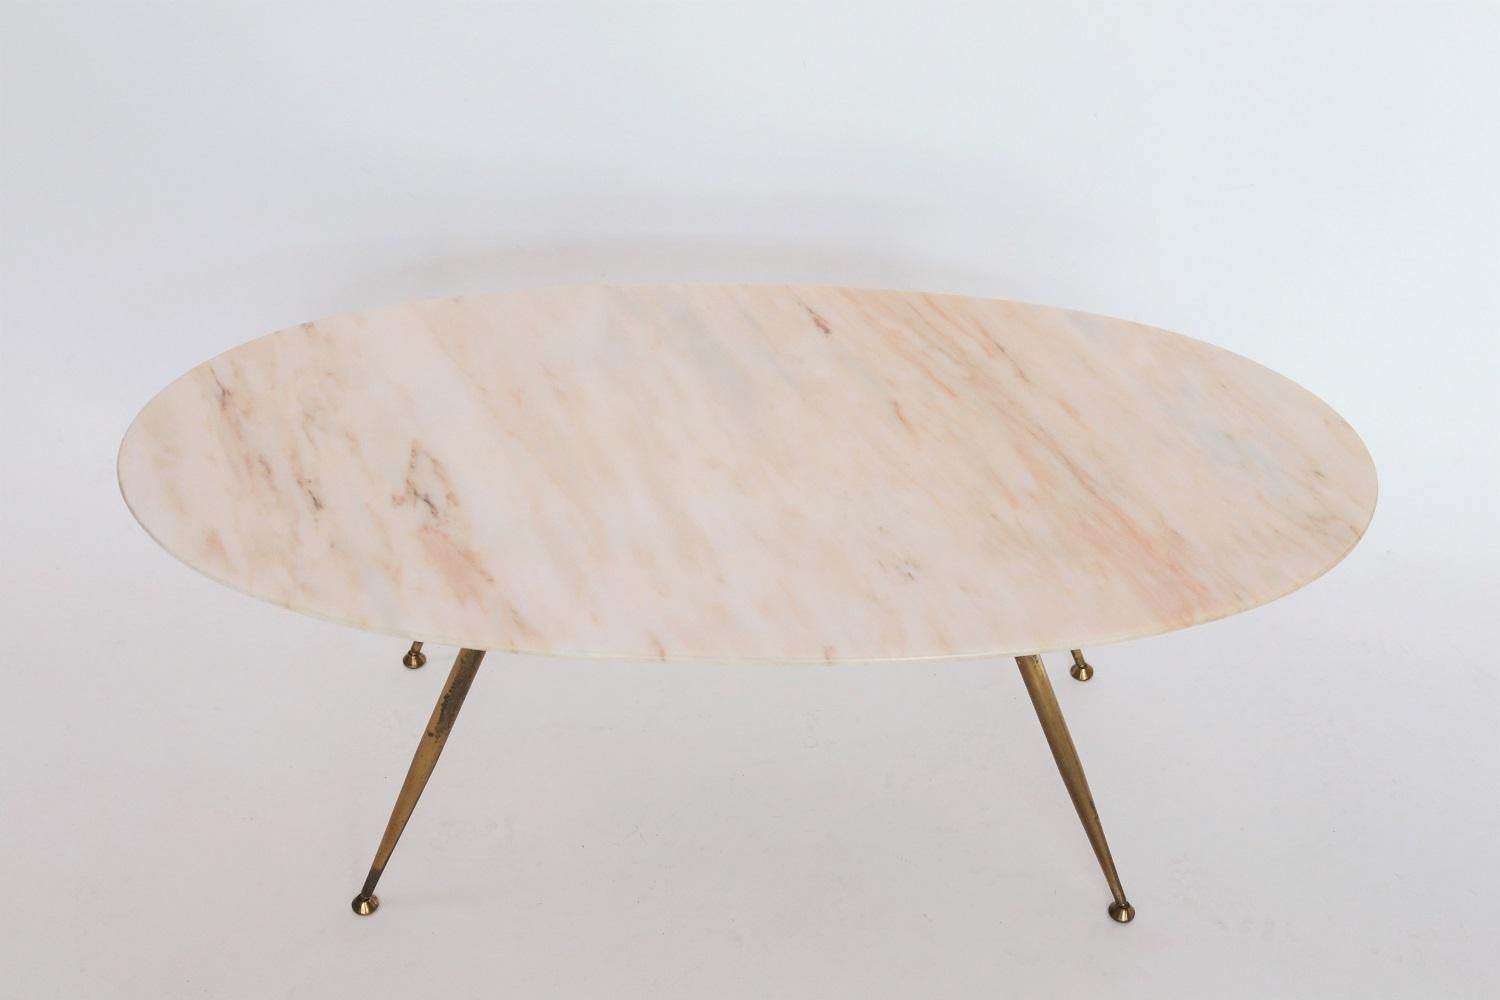 Magnificent oval coffee table with gorgeous elegant light pink / rose and grey marble top and full brass legs with moving tips.
Made in Italy during the 1950s.
The marble is called 